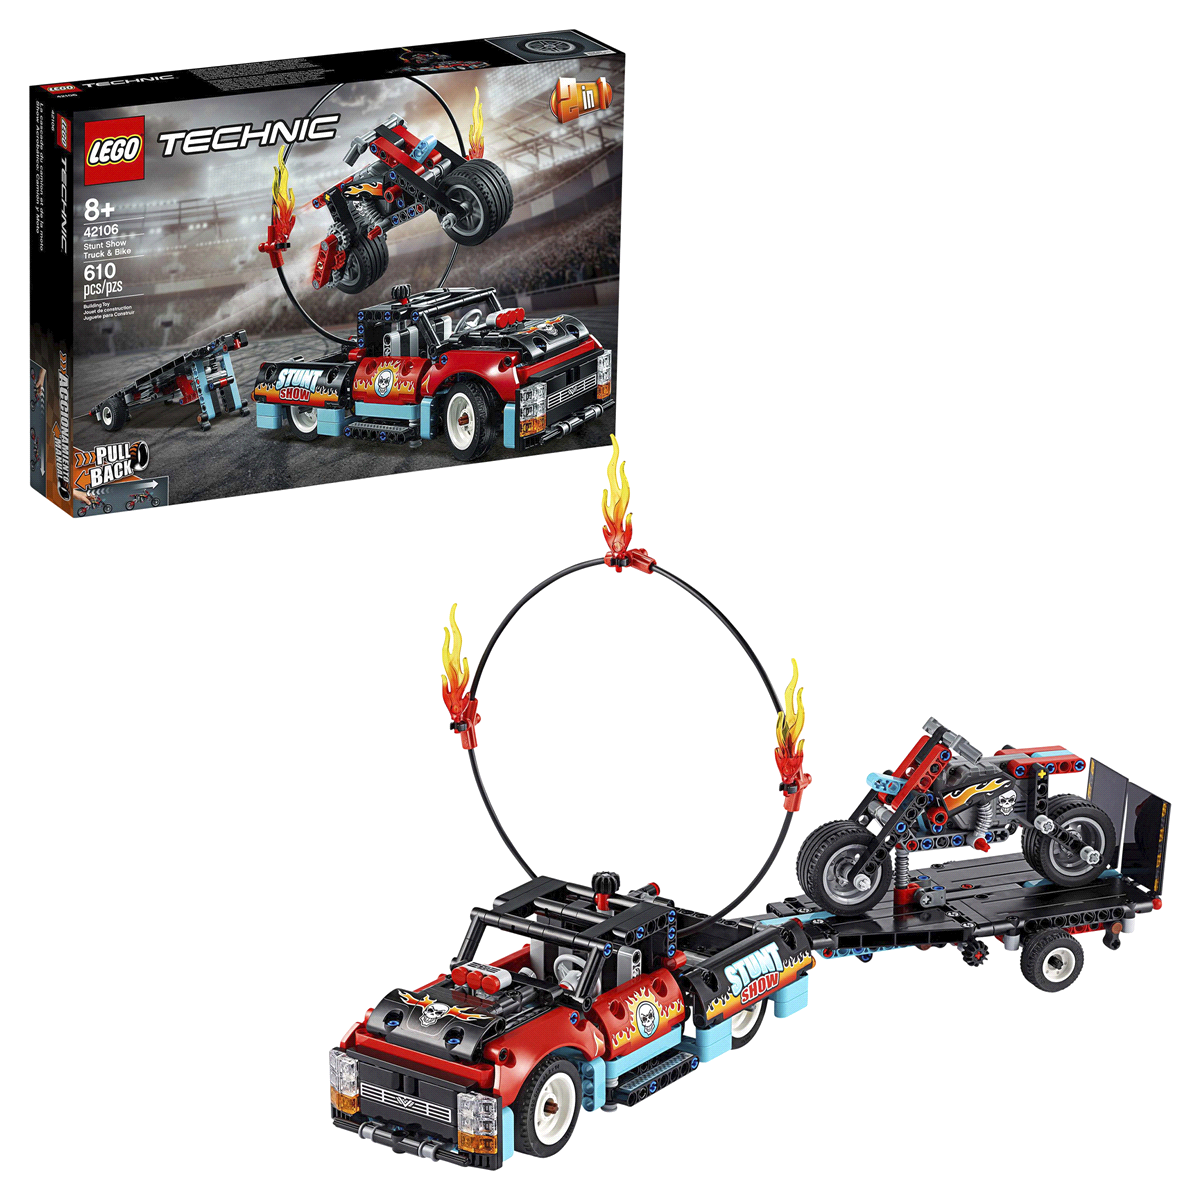 slide 1 of 1, LEGO Technic Stunt Show Truck and Bike 42106 with Trailer and Fire Ring, 1 ct